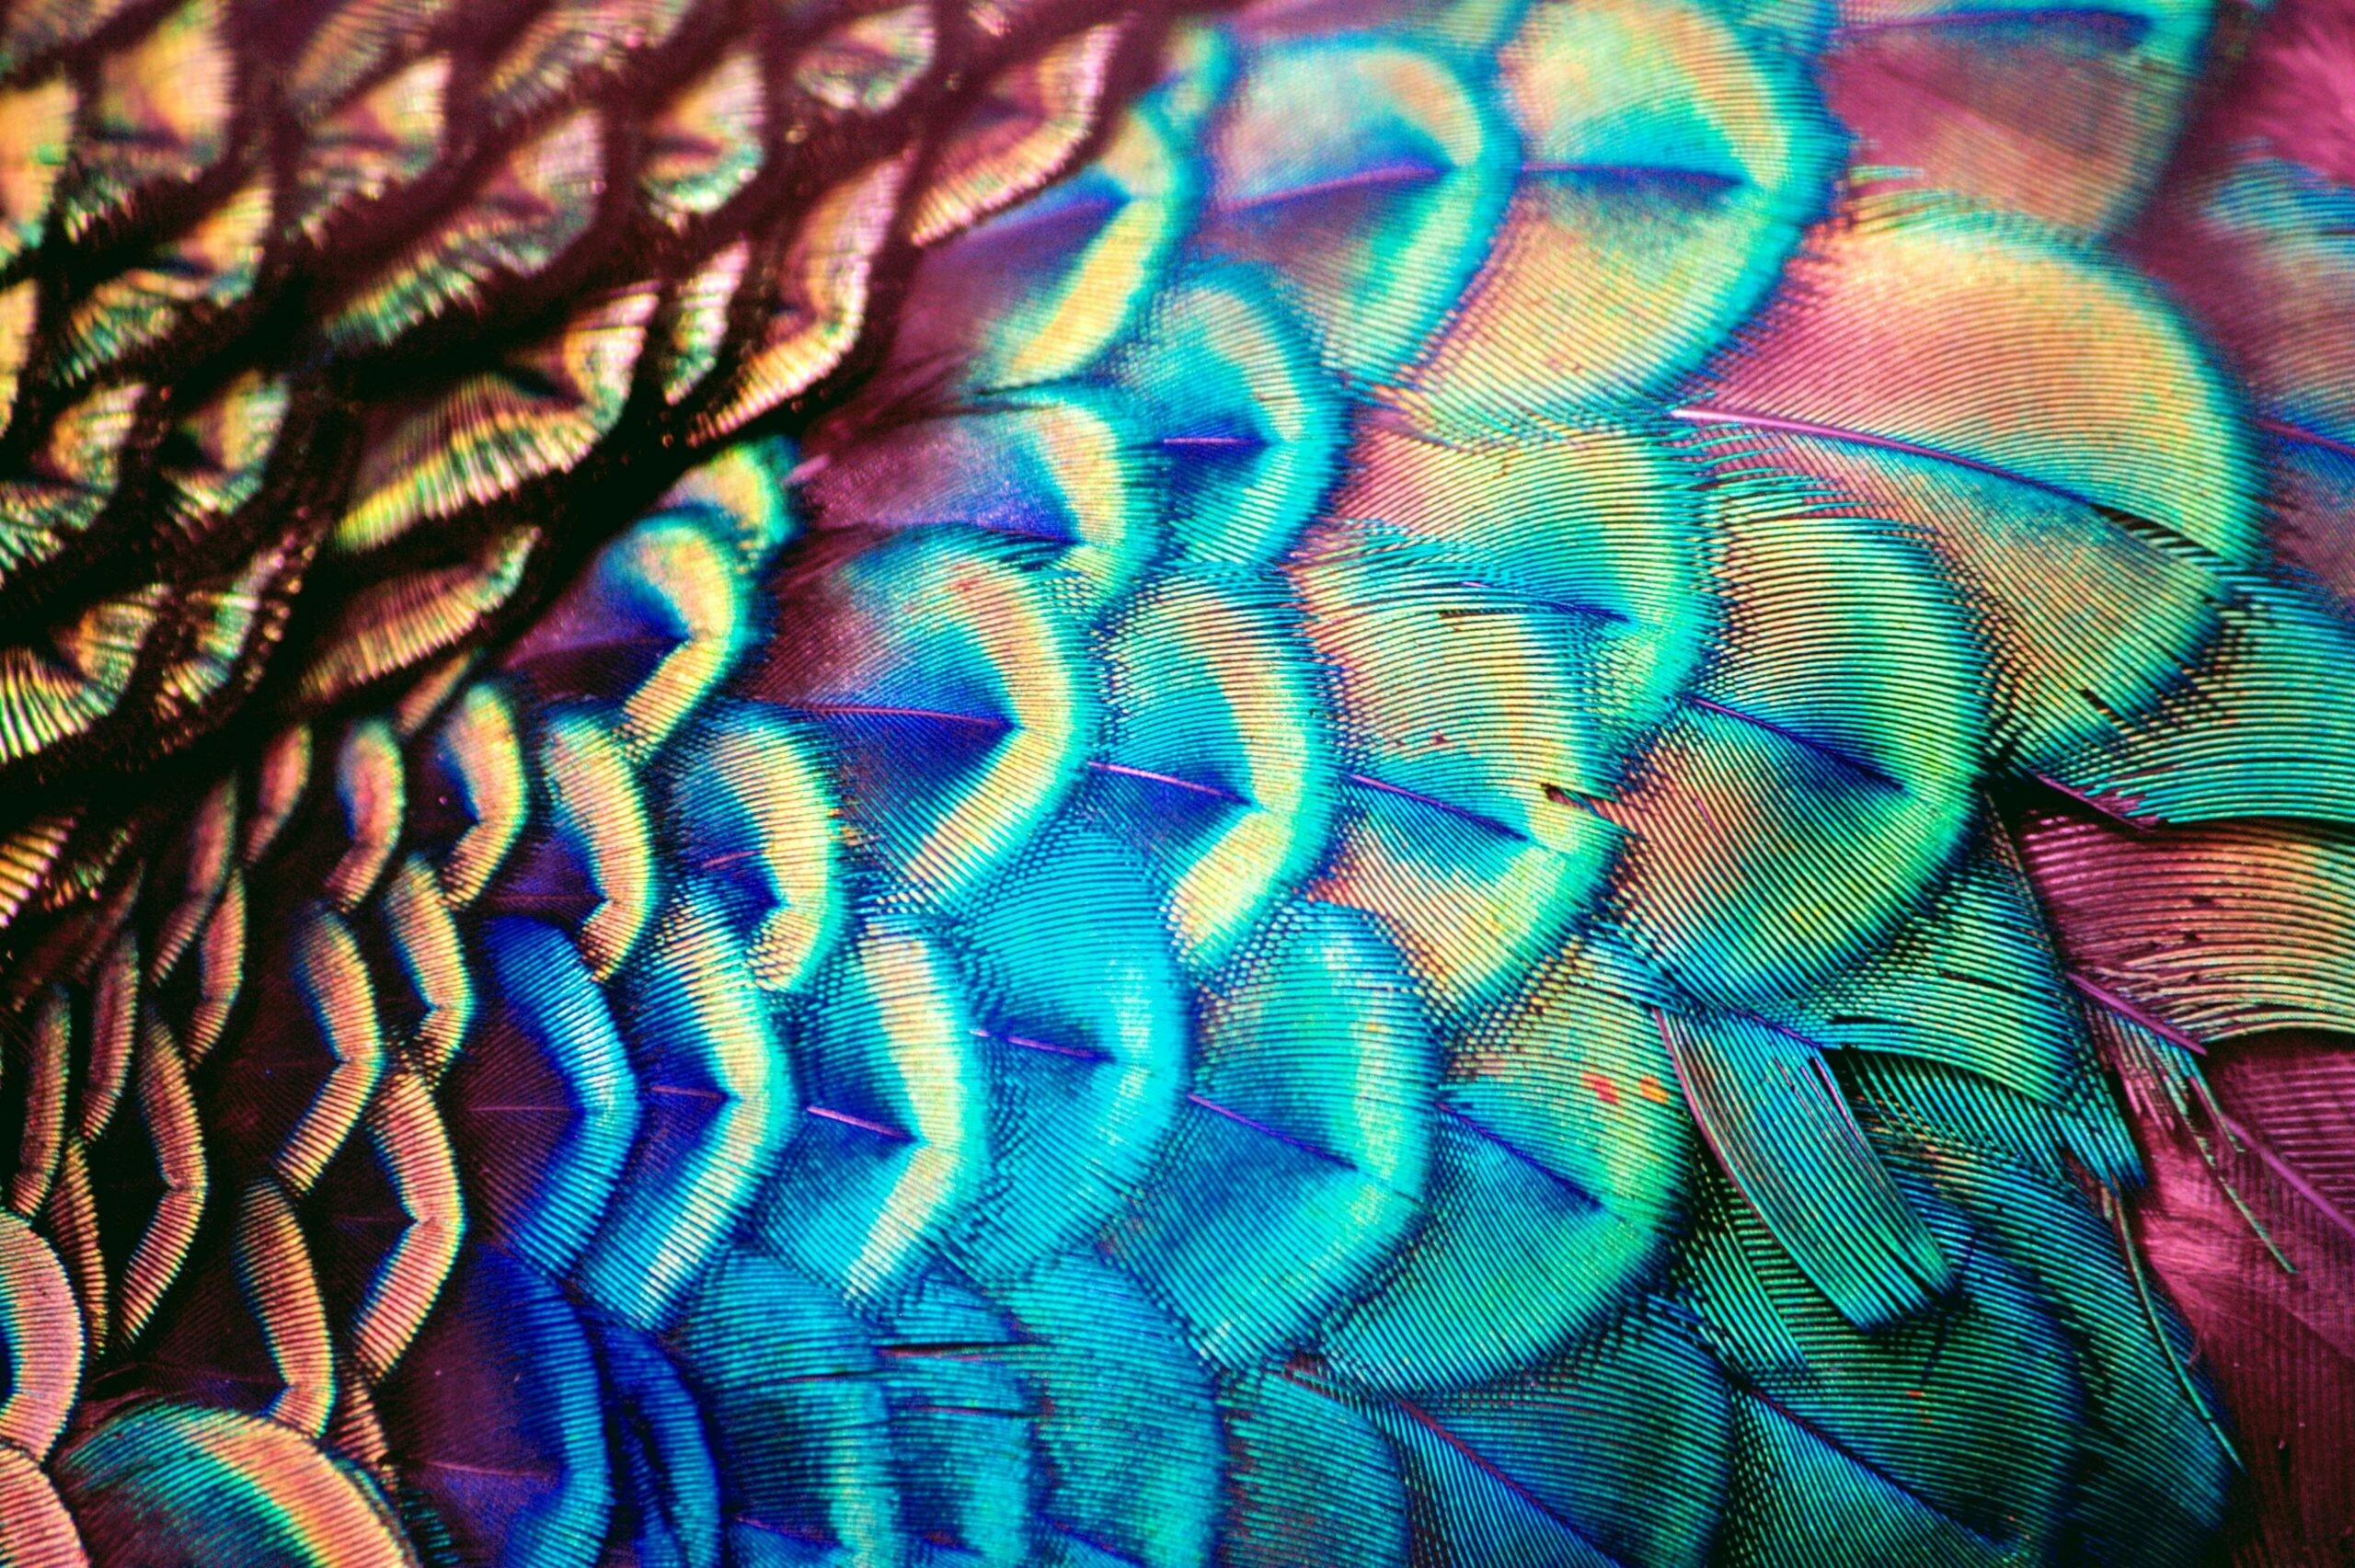 Peacock: The one African species is the Congo peafowl. 2560x1710 HD Wallpaper.